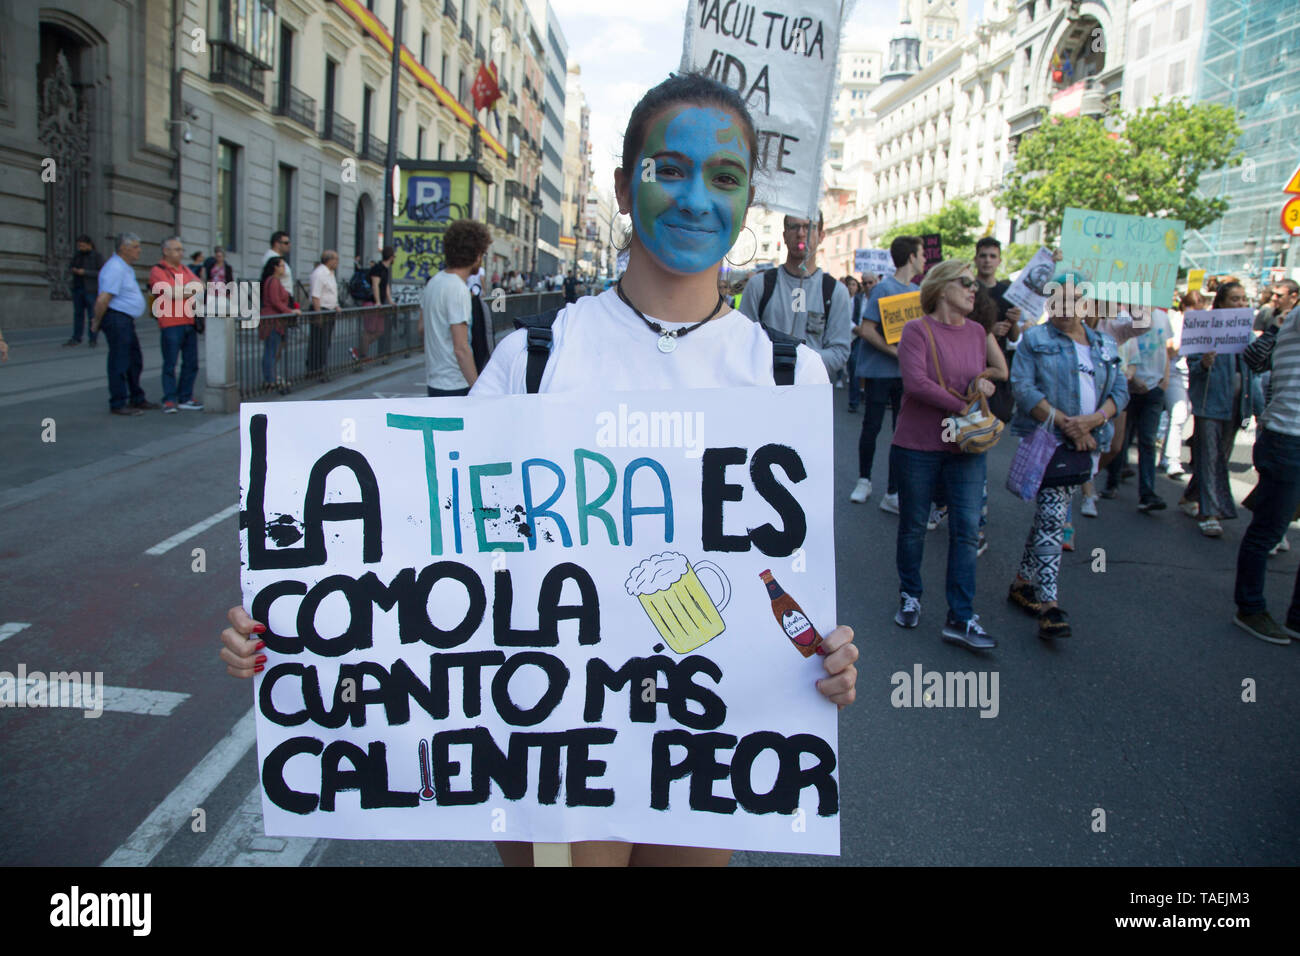 A protester with a painted face of the Earth seen holding a placard that says Spanish The Earth is like a beer, the hotter the worse during the protest. Hundreds of young Spaniards joined the international movement Fridays for Future in Madrid to protest against the climate situation and demand for measures against climate change with the principal slogan 'There is not planet B'. Stock Photo